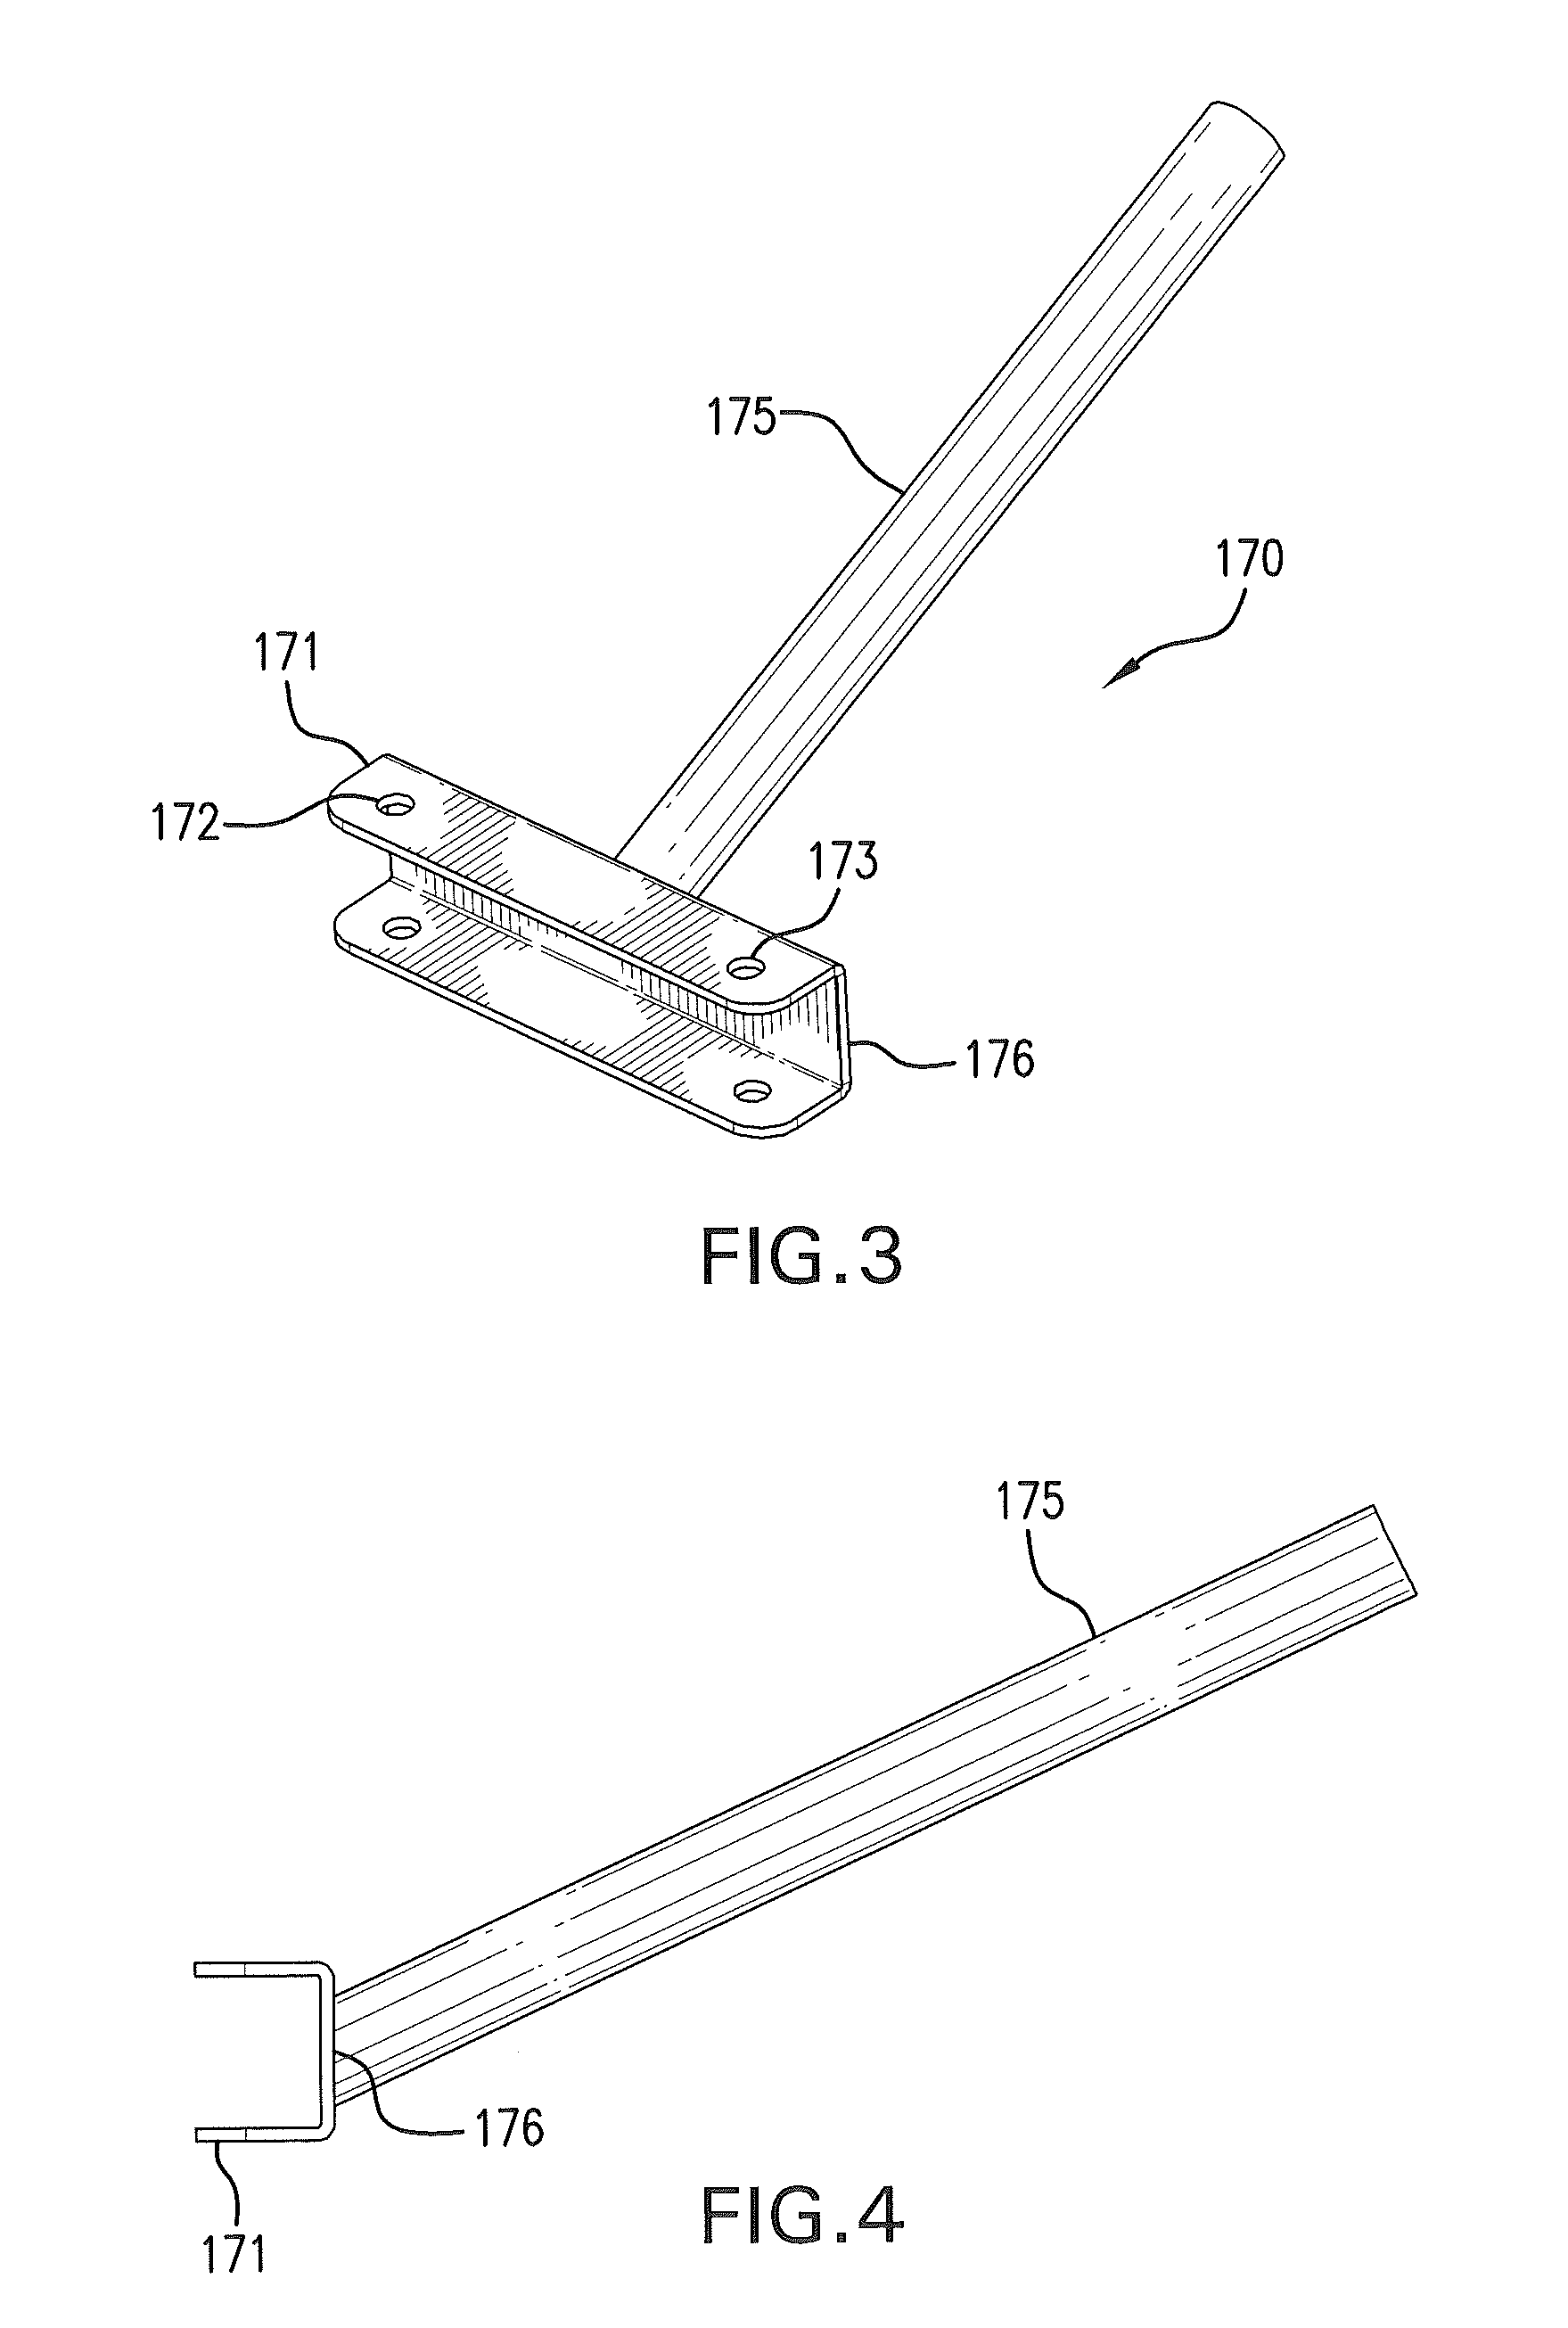 Modular clamp assembly with multiple tool attachments